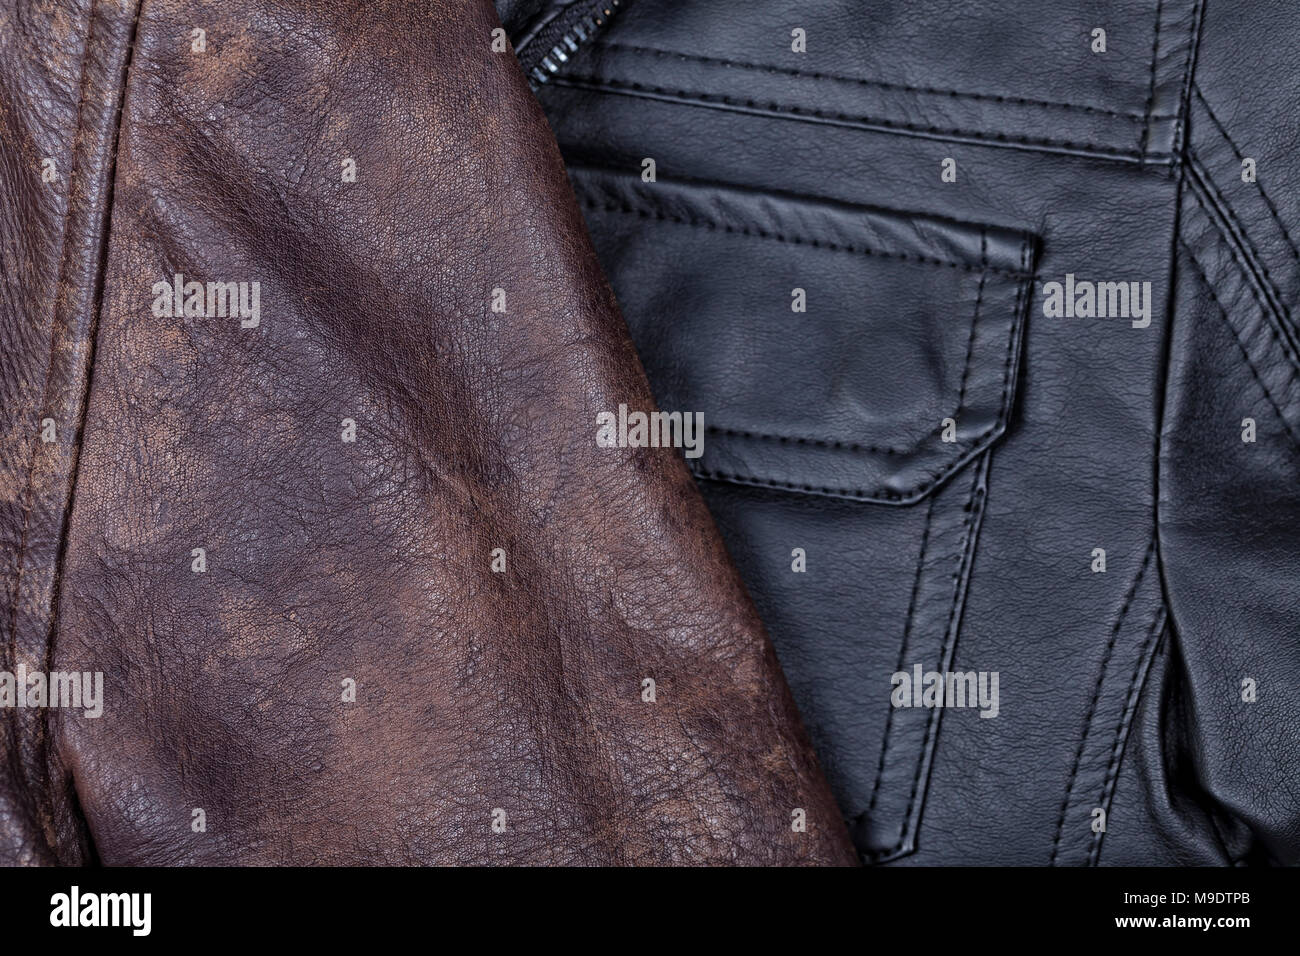 Leather jackets in brown and black colors background. Stock Photo